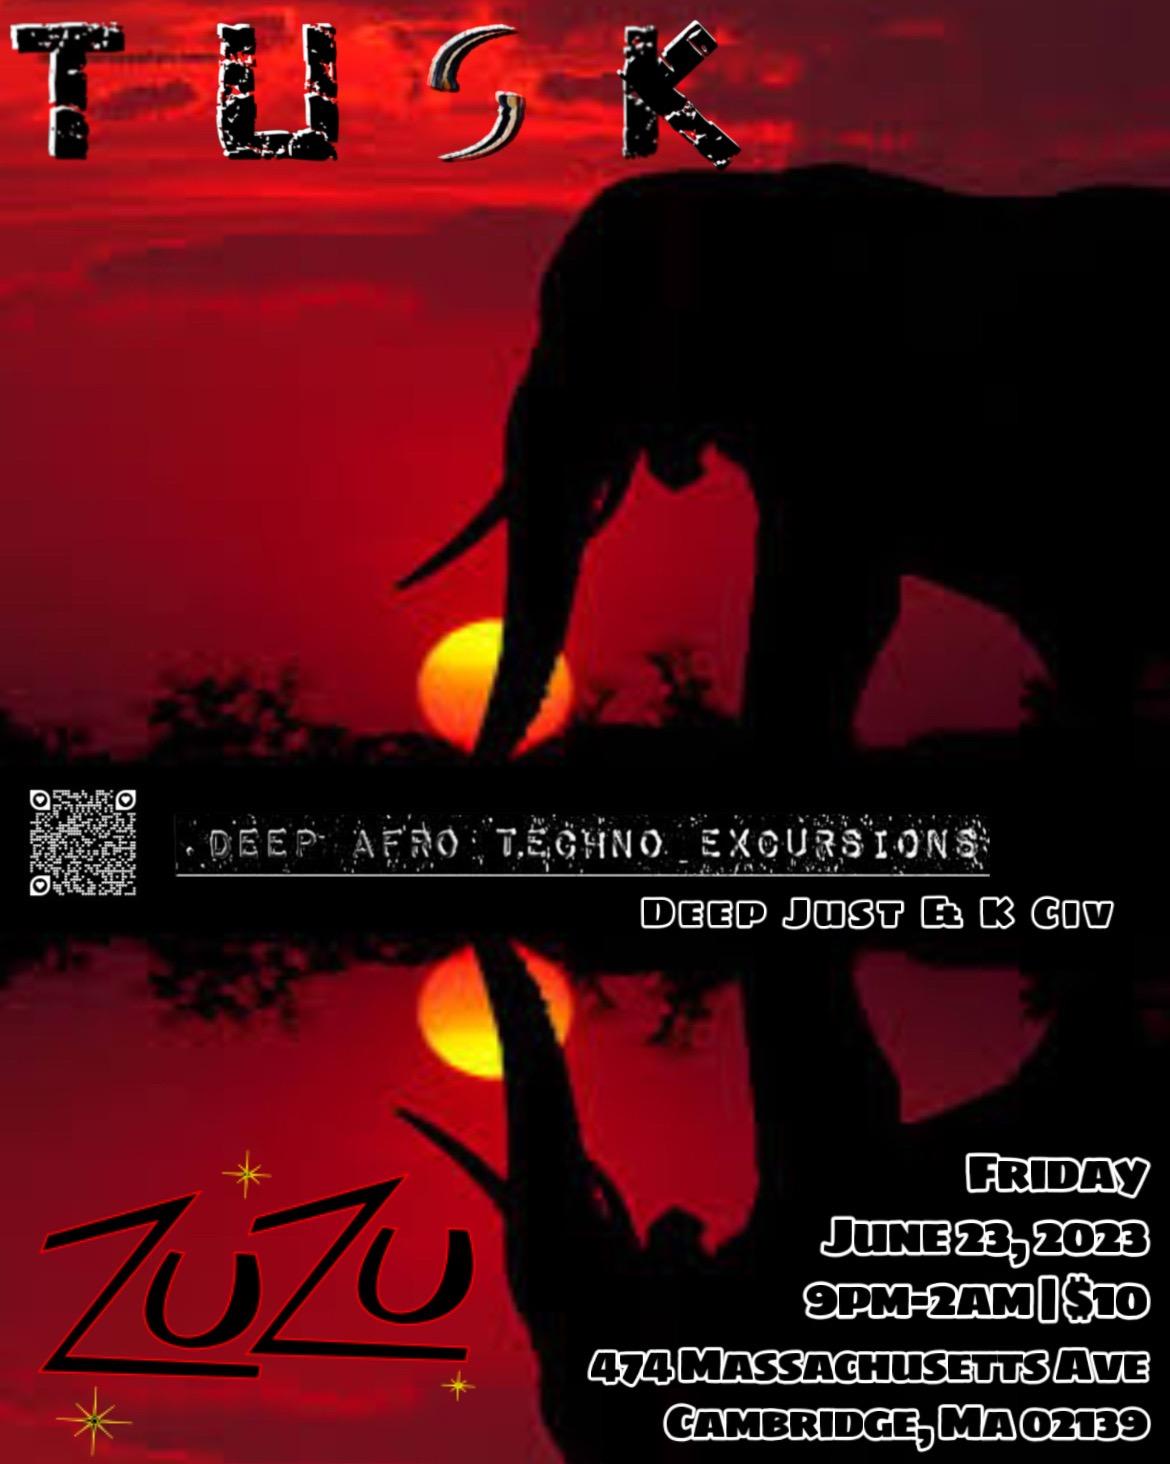 TUSK deep afro techno excursions